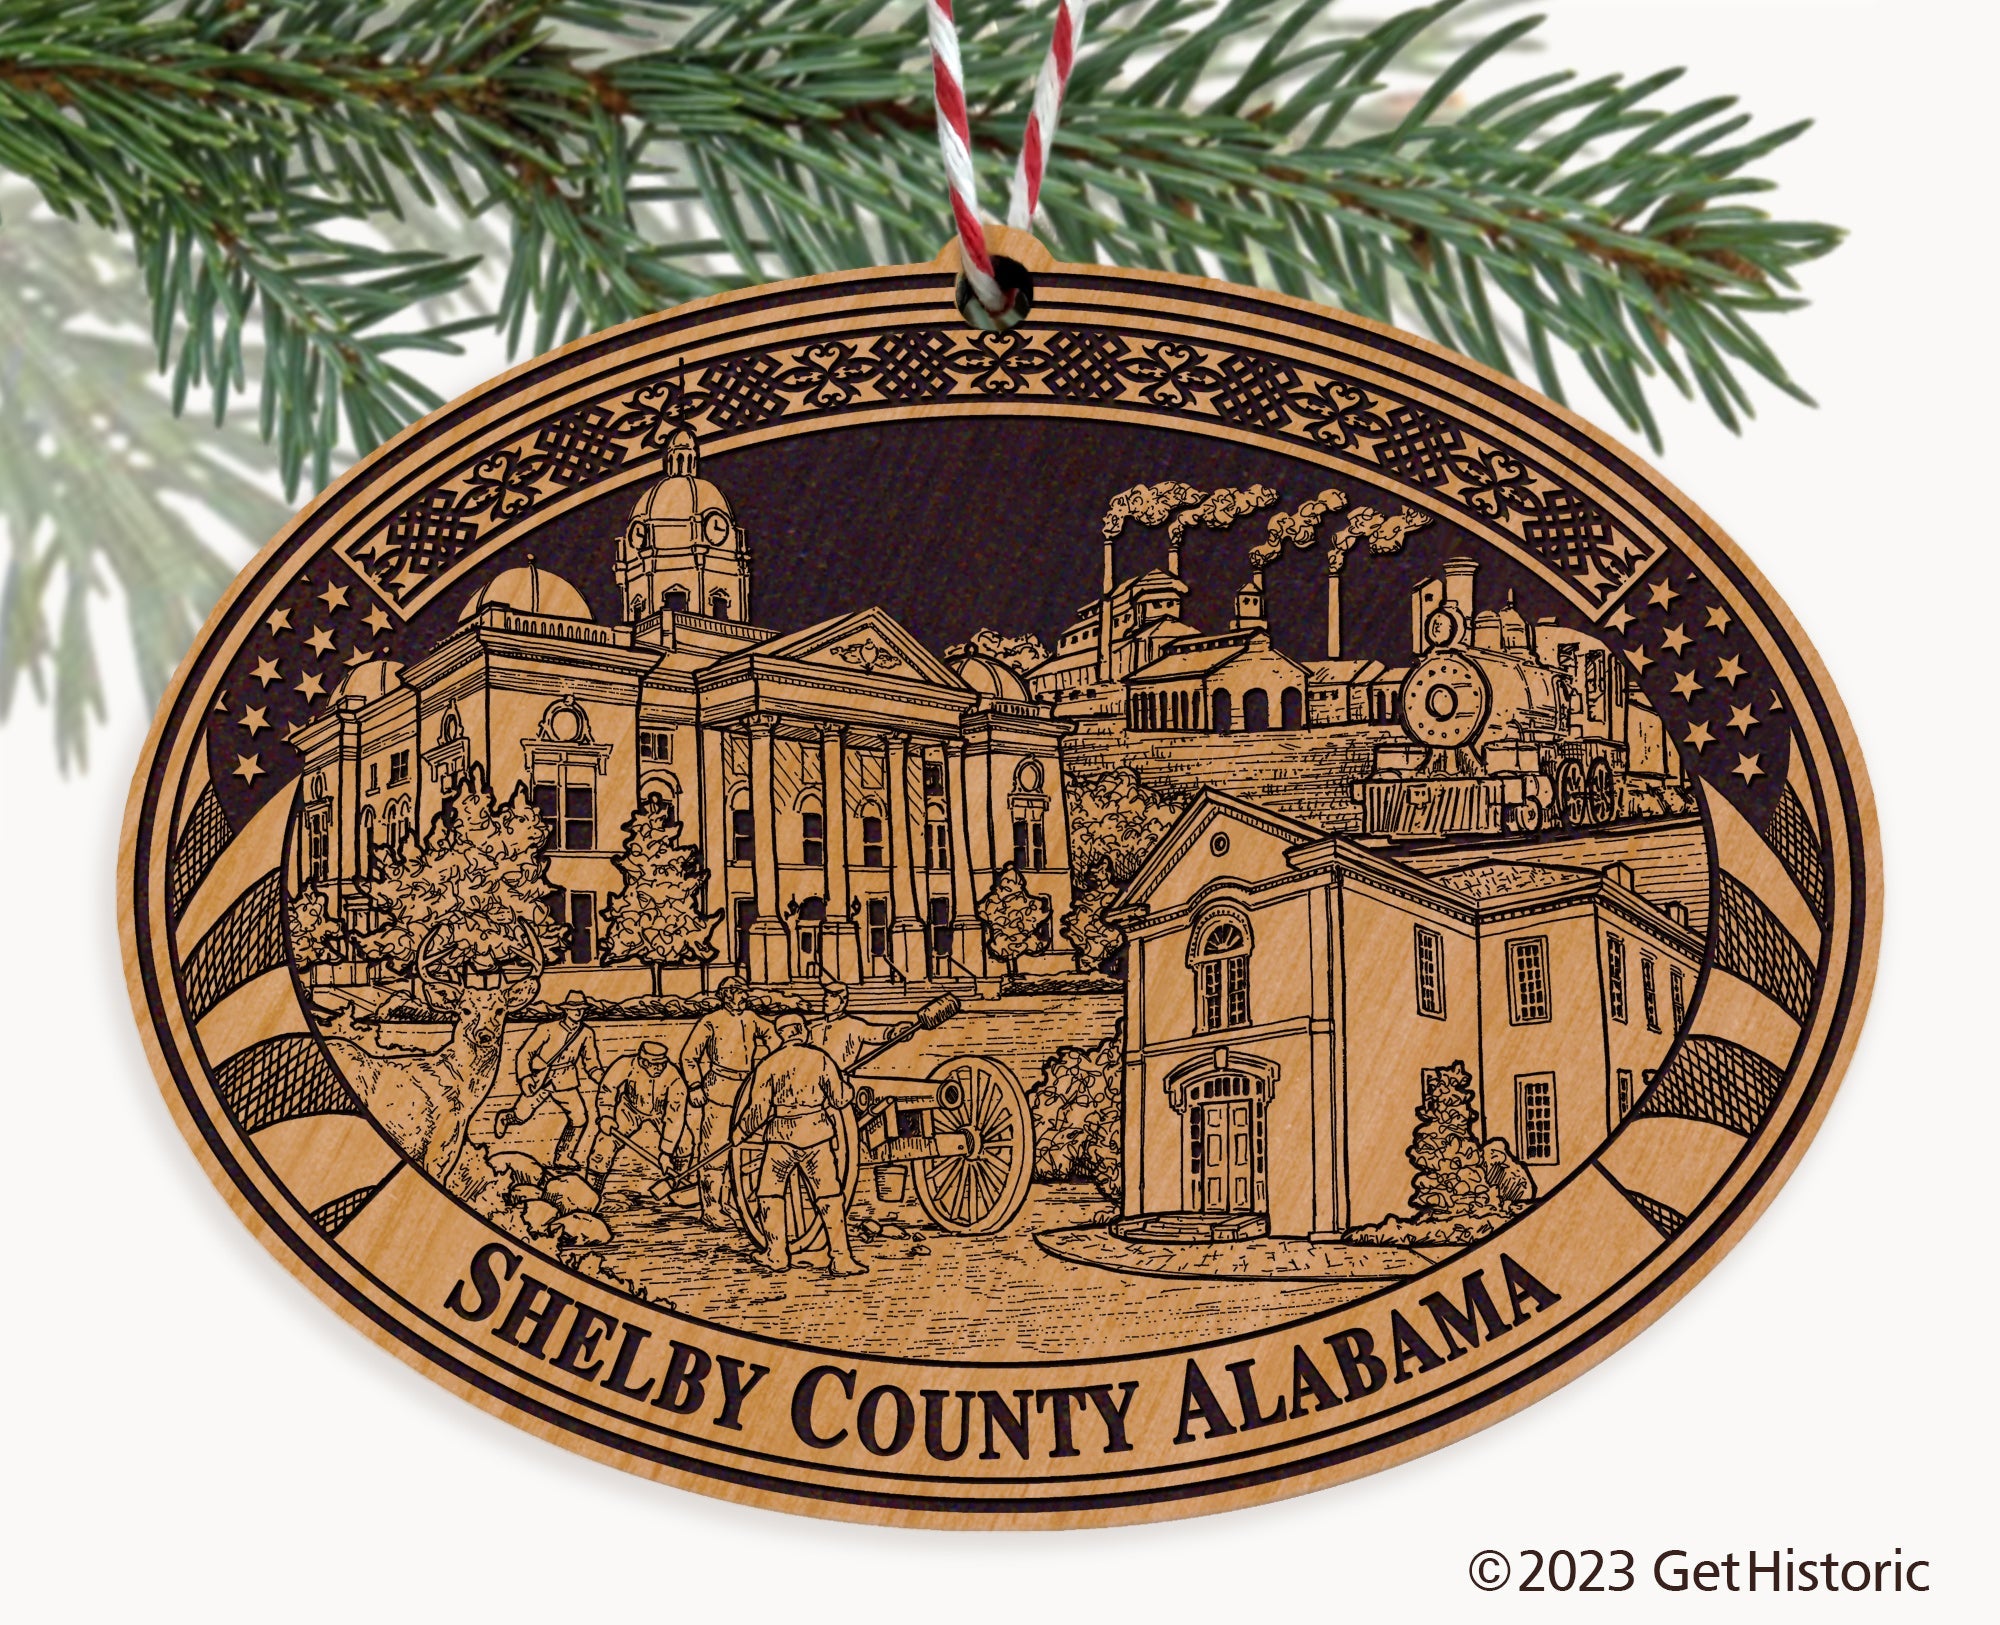 Shelby County Alabama Engraved Natural Ornament